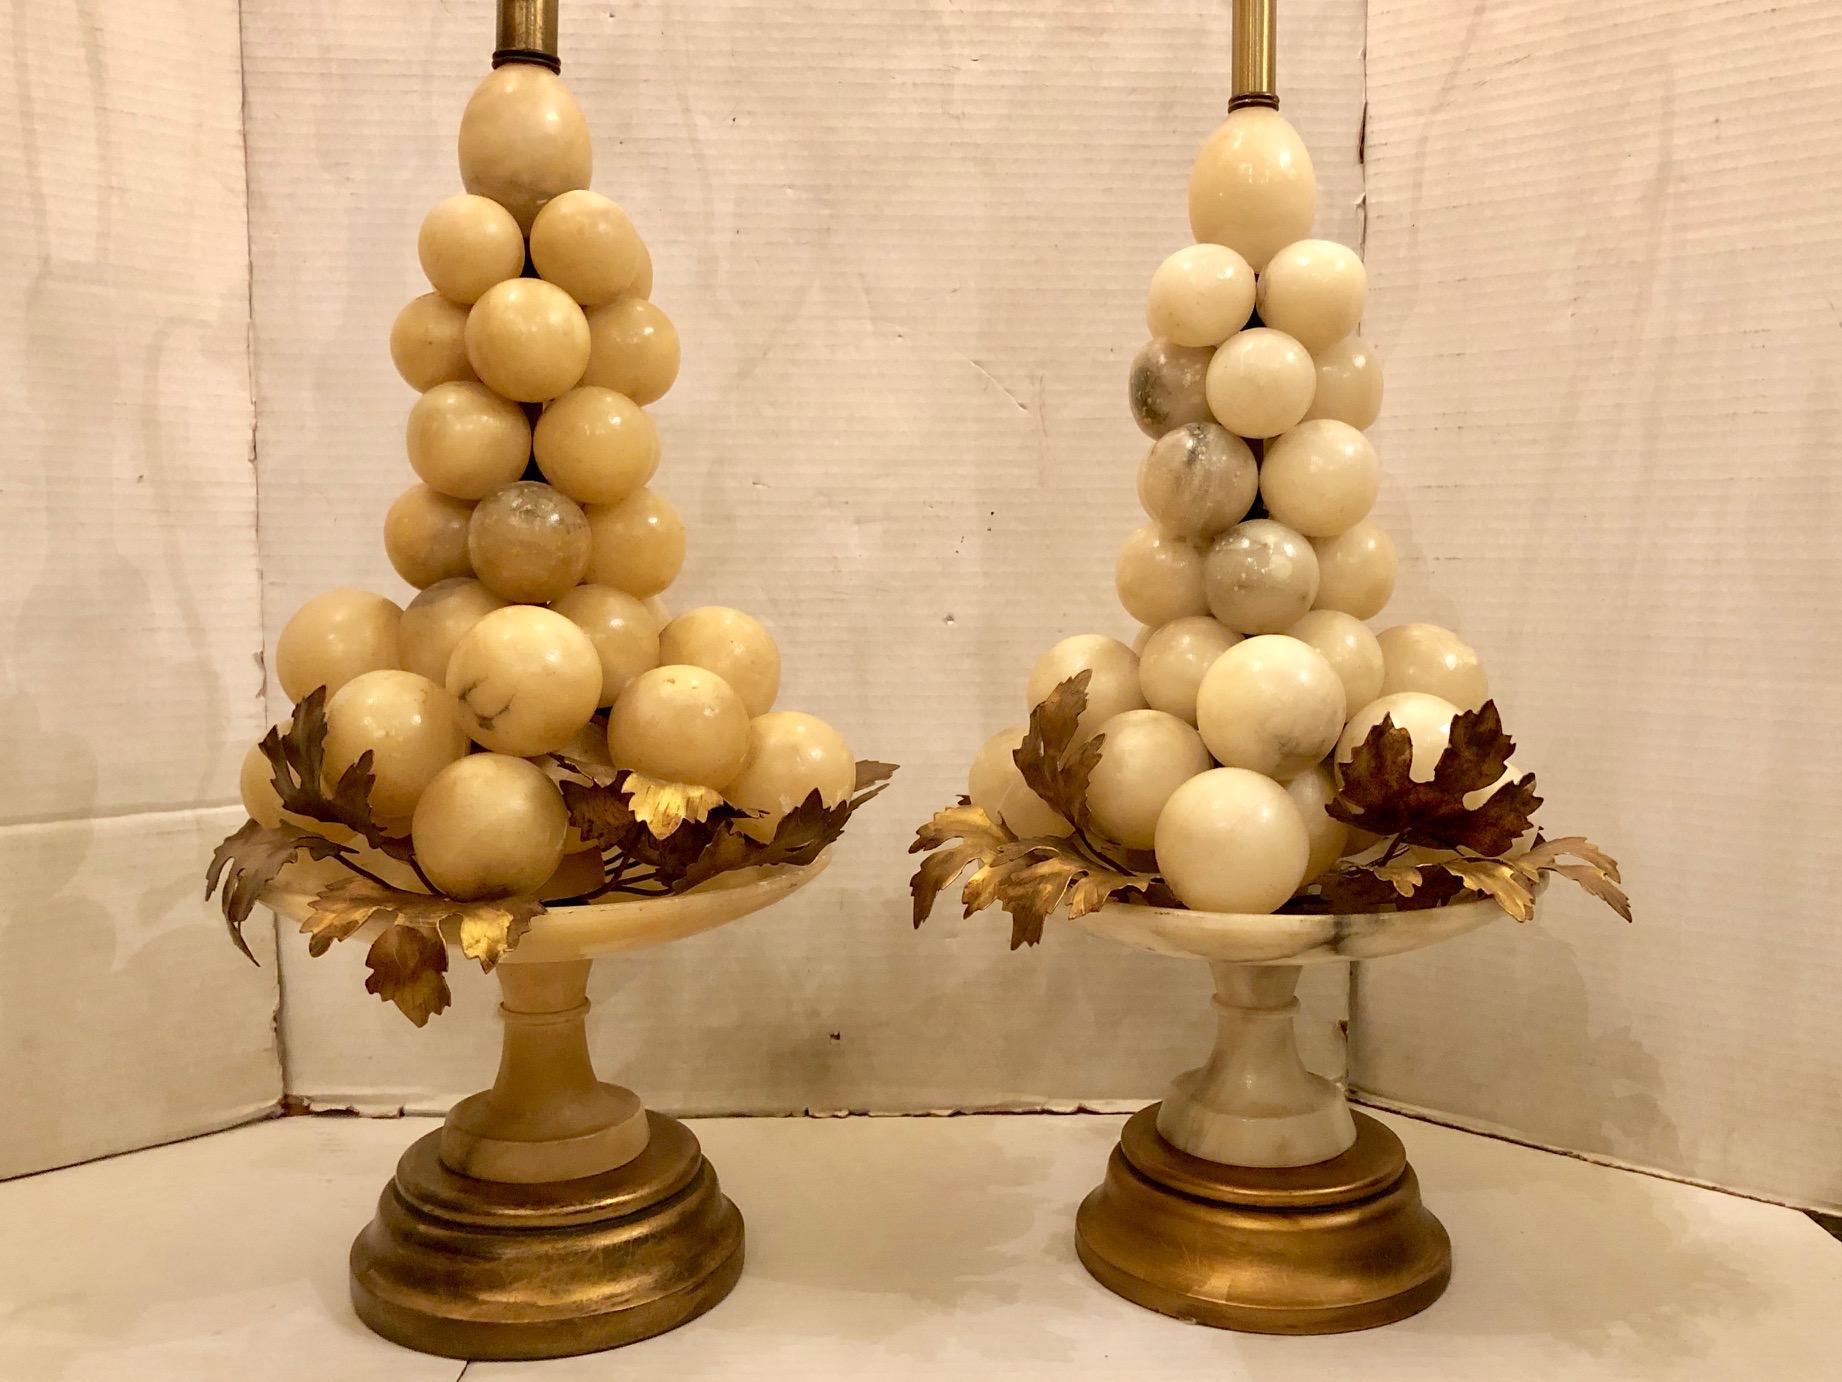 A pair of Italian circa 1940's large alabaster lamps shaped as grapes on an alabaster tassa. Gilt wood bases, gilt metal grape leaves.

Measurements:
Height of body: 22